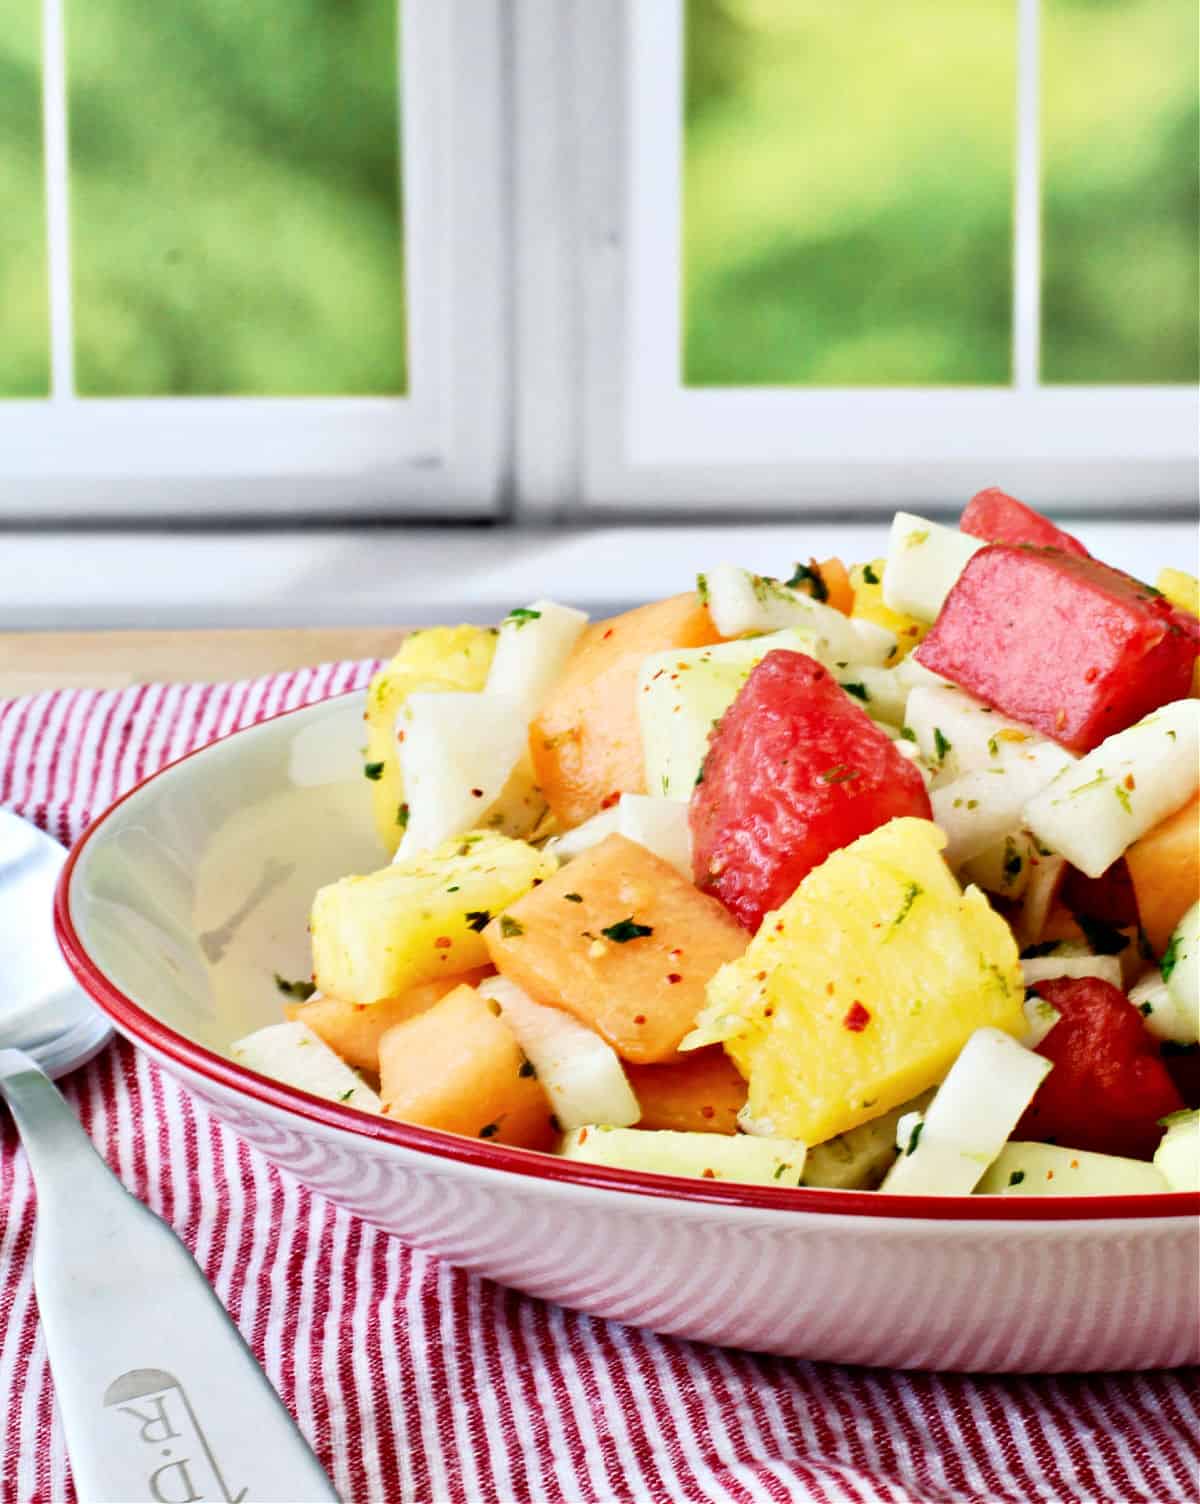 Melon, Jicama, and Pineapple Salad in a red rimmed white bowl.